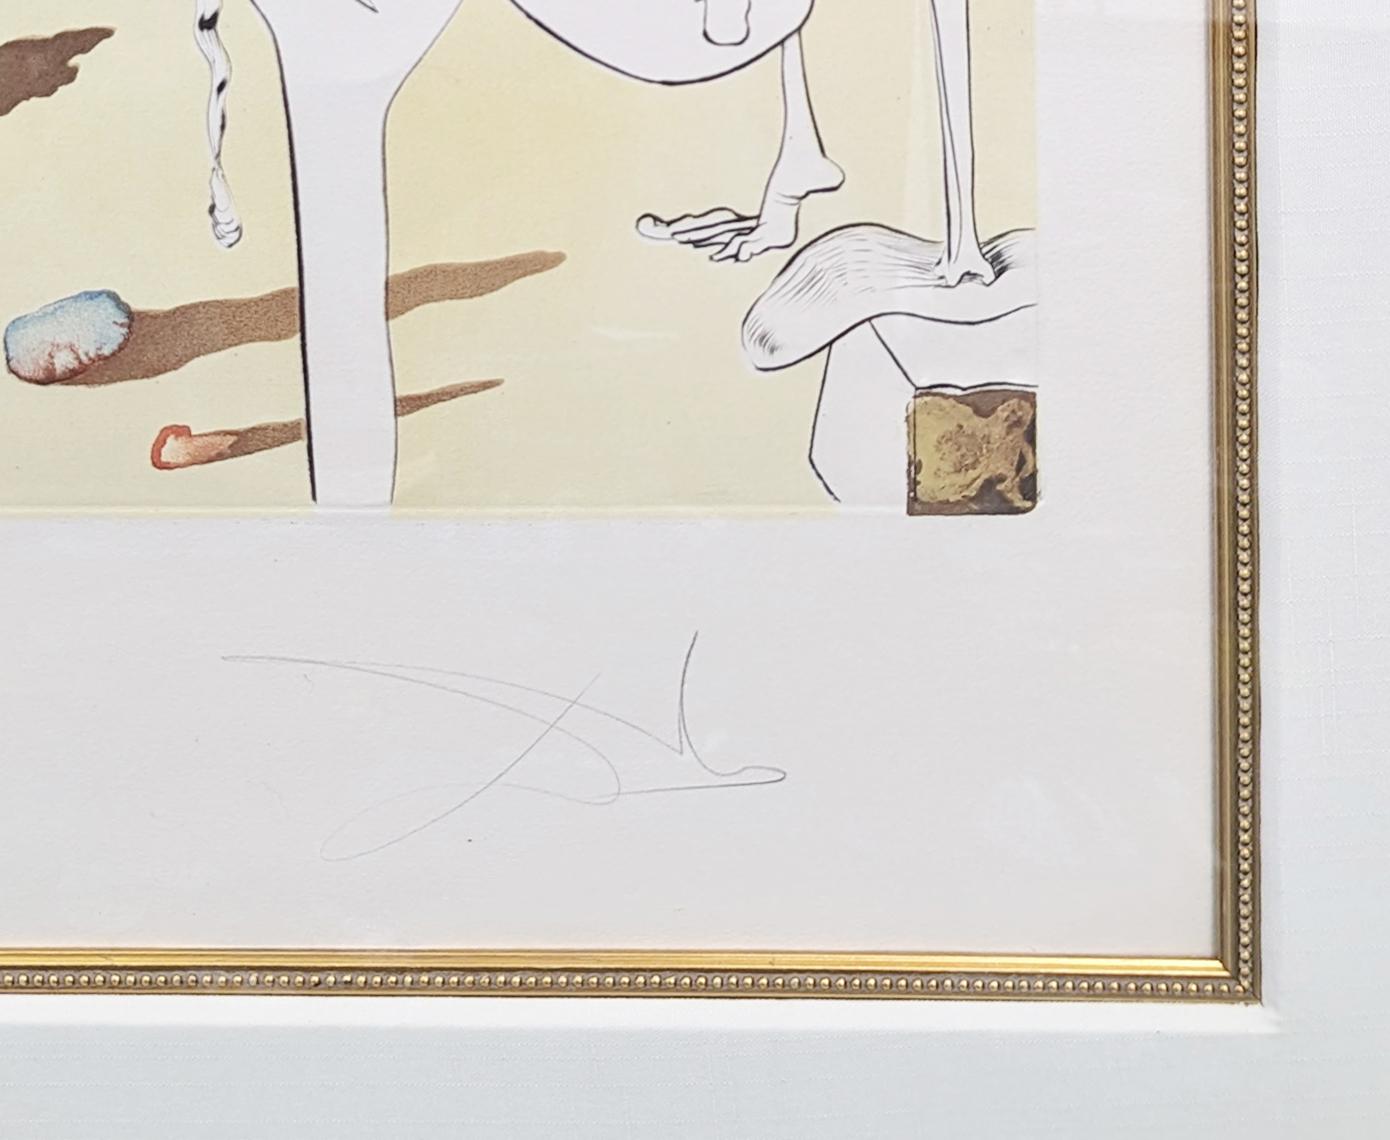 INFRATERRESTRIALS ADORED BY DALI AT THE AGE OF SIX ... - Print by Salvador Dalí